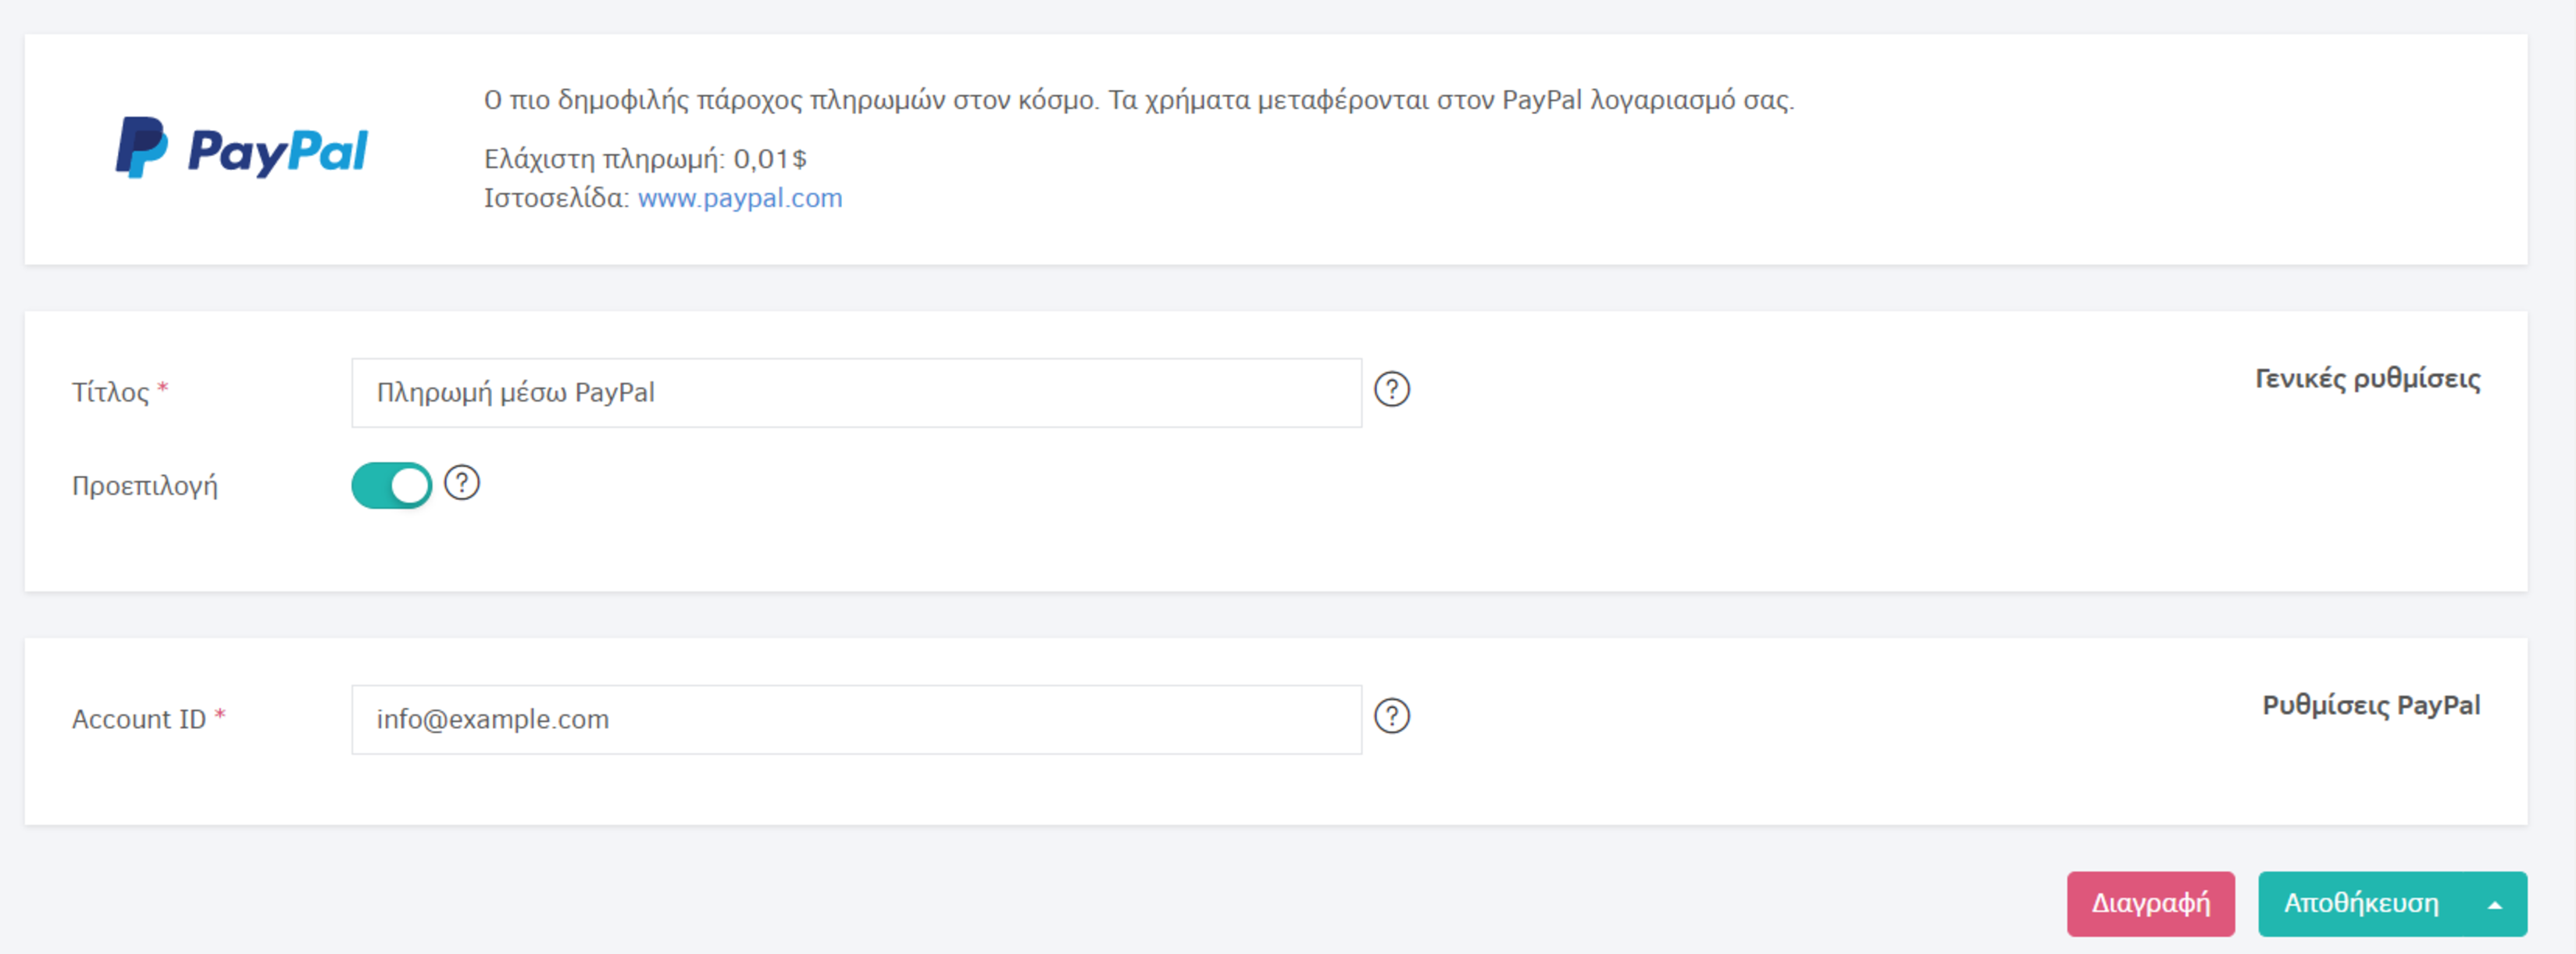 paypal integration page 1